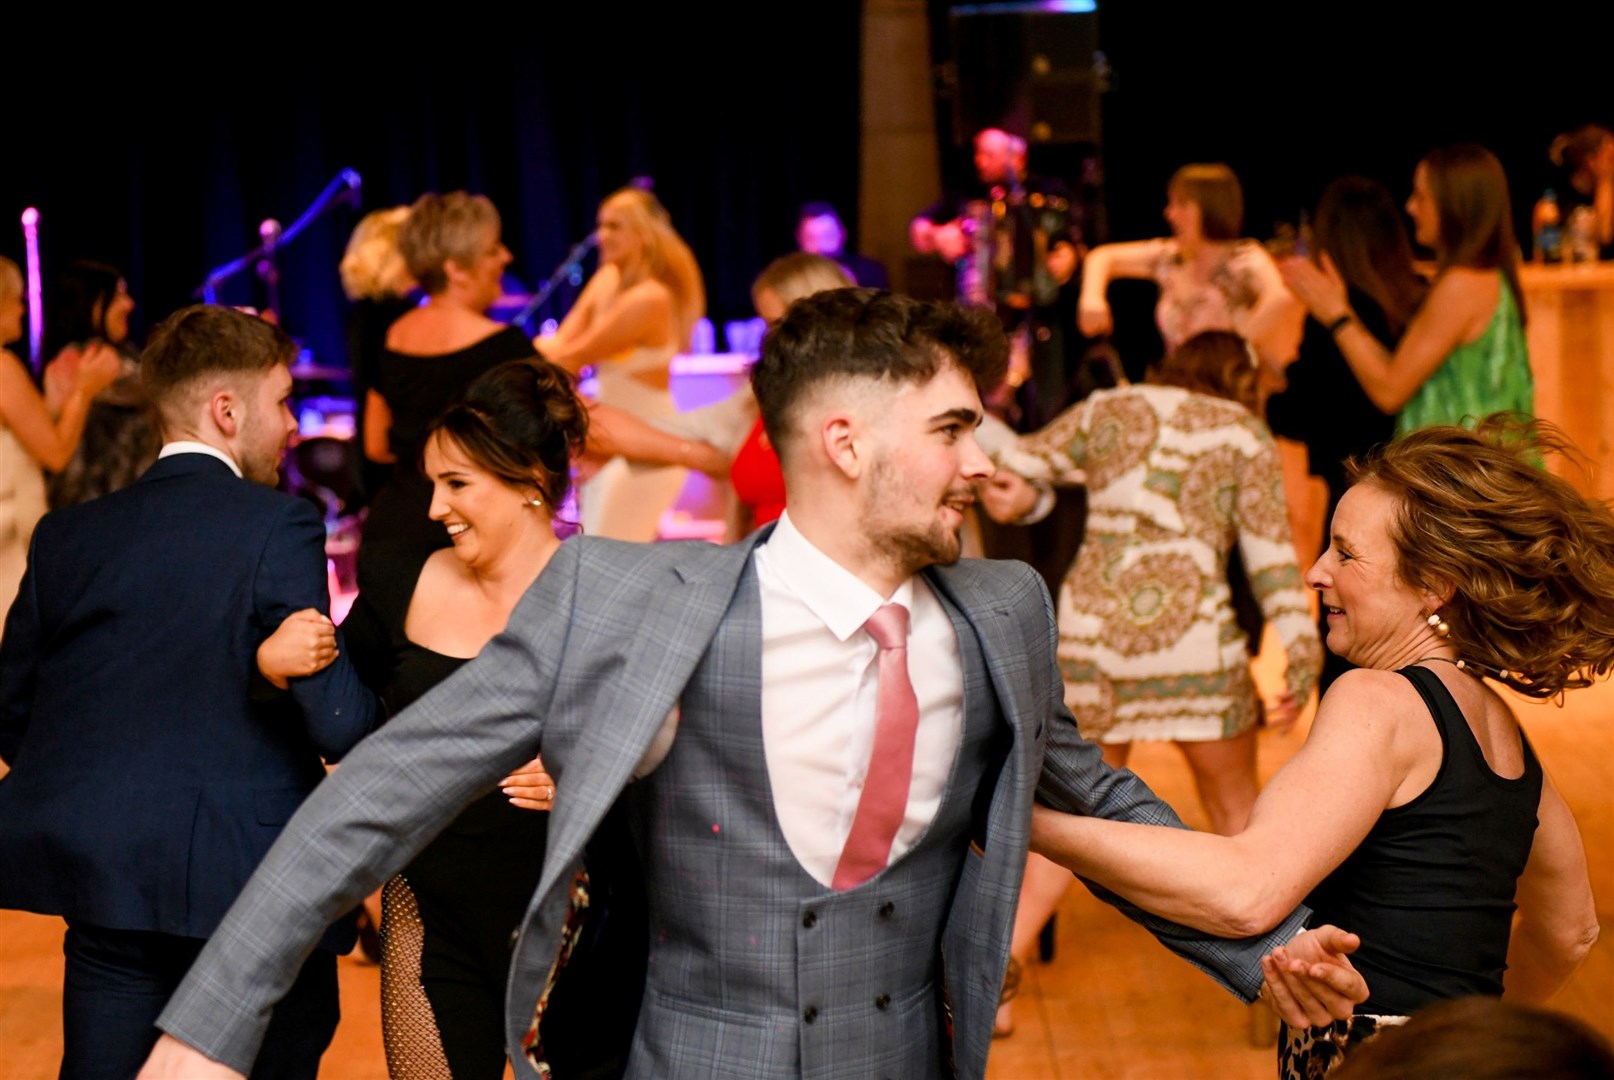 There were plenty of laughs at the dance. Picture: James Mackenzie